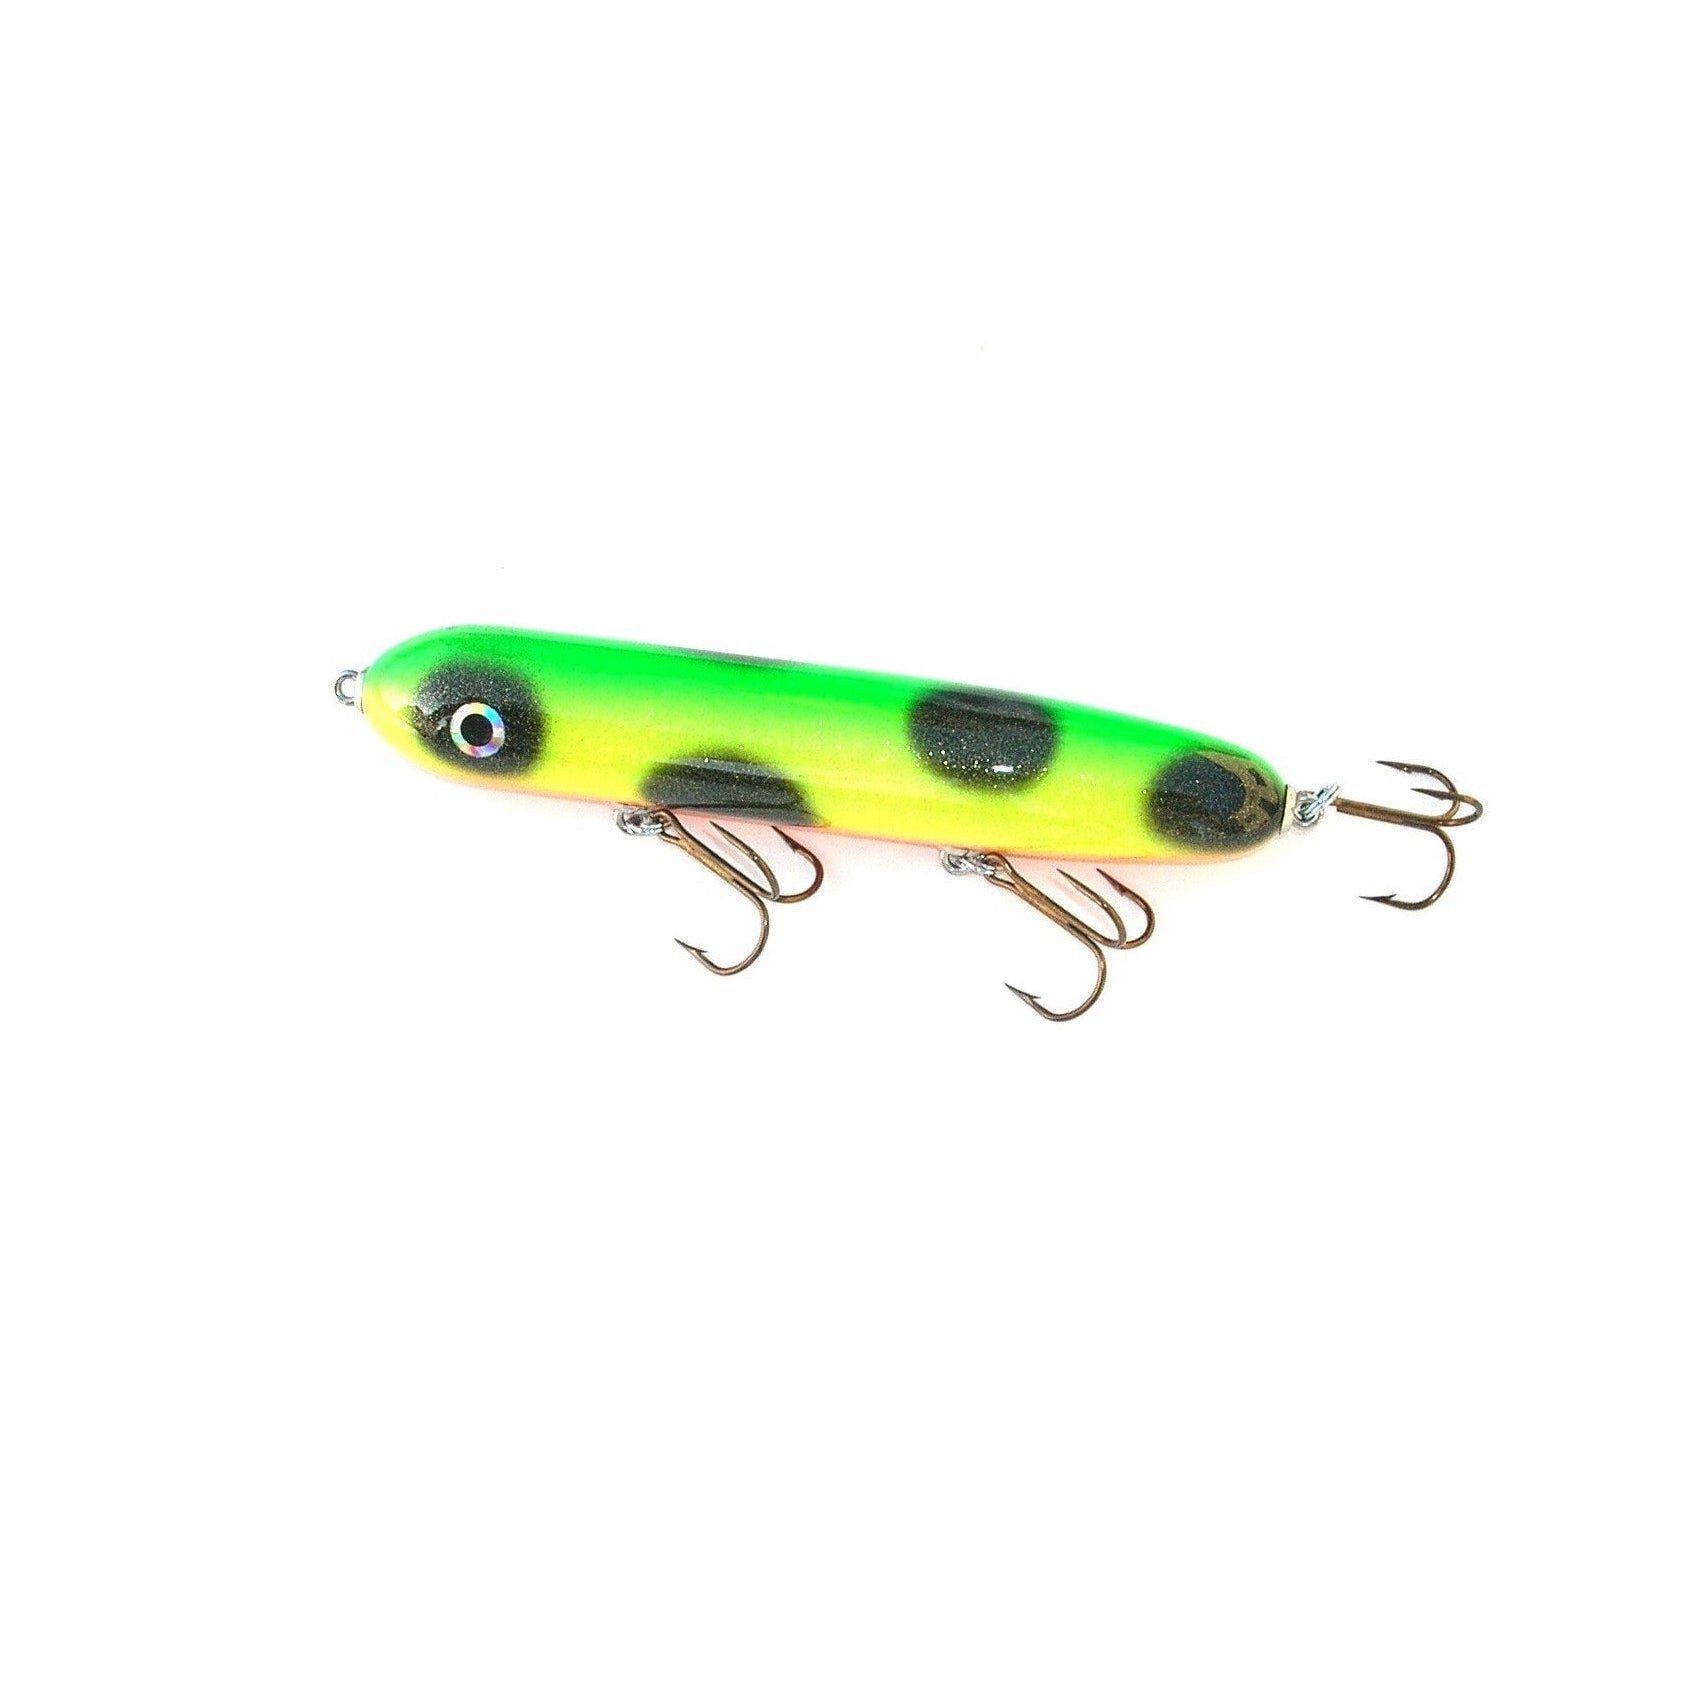 Suick Wabull 8 Dive/Glide Bait | Musky Lures Fire Bandit